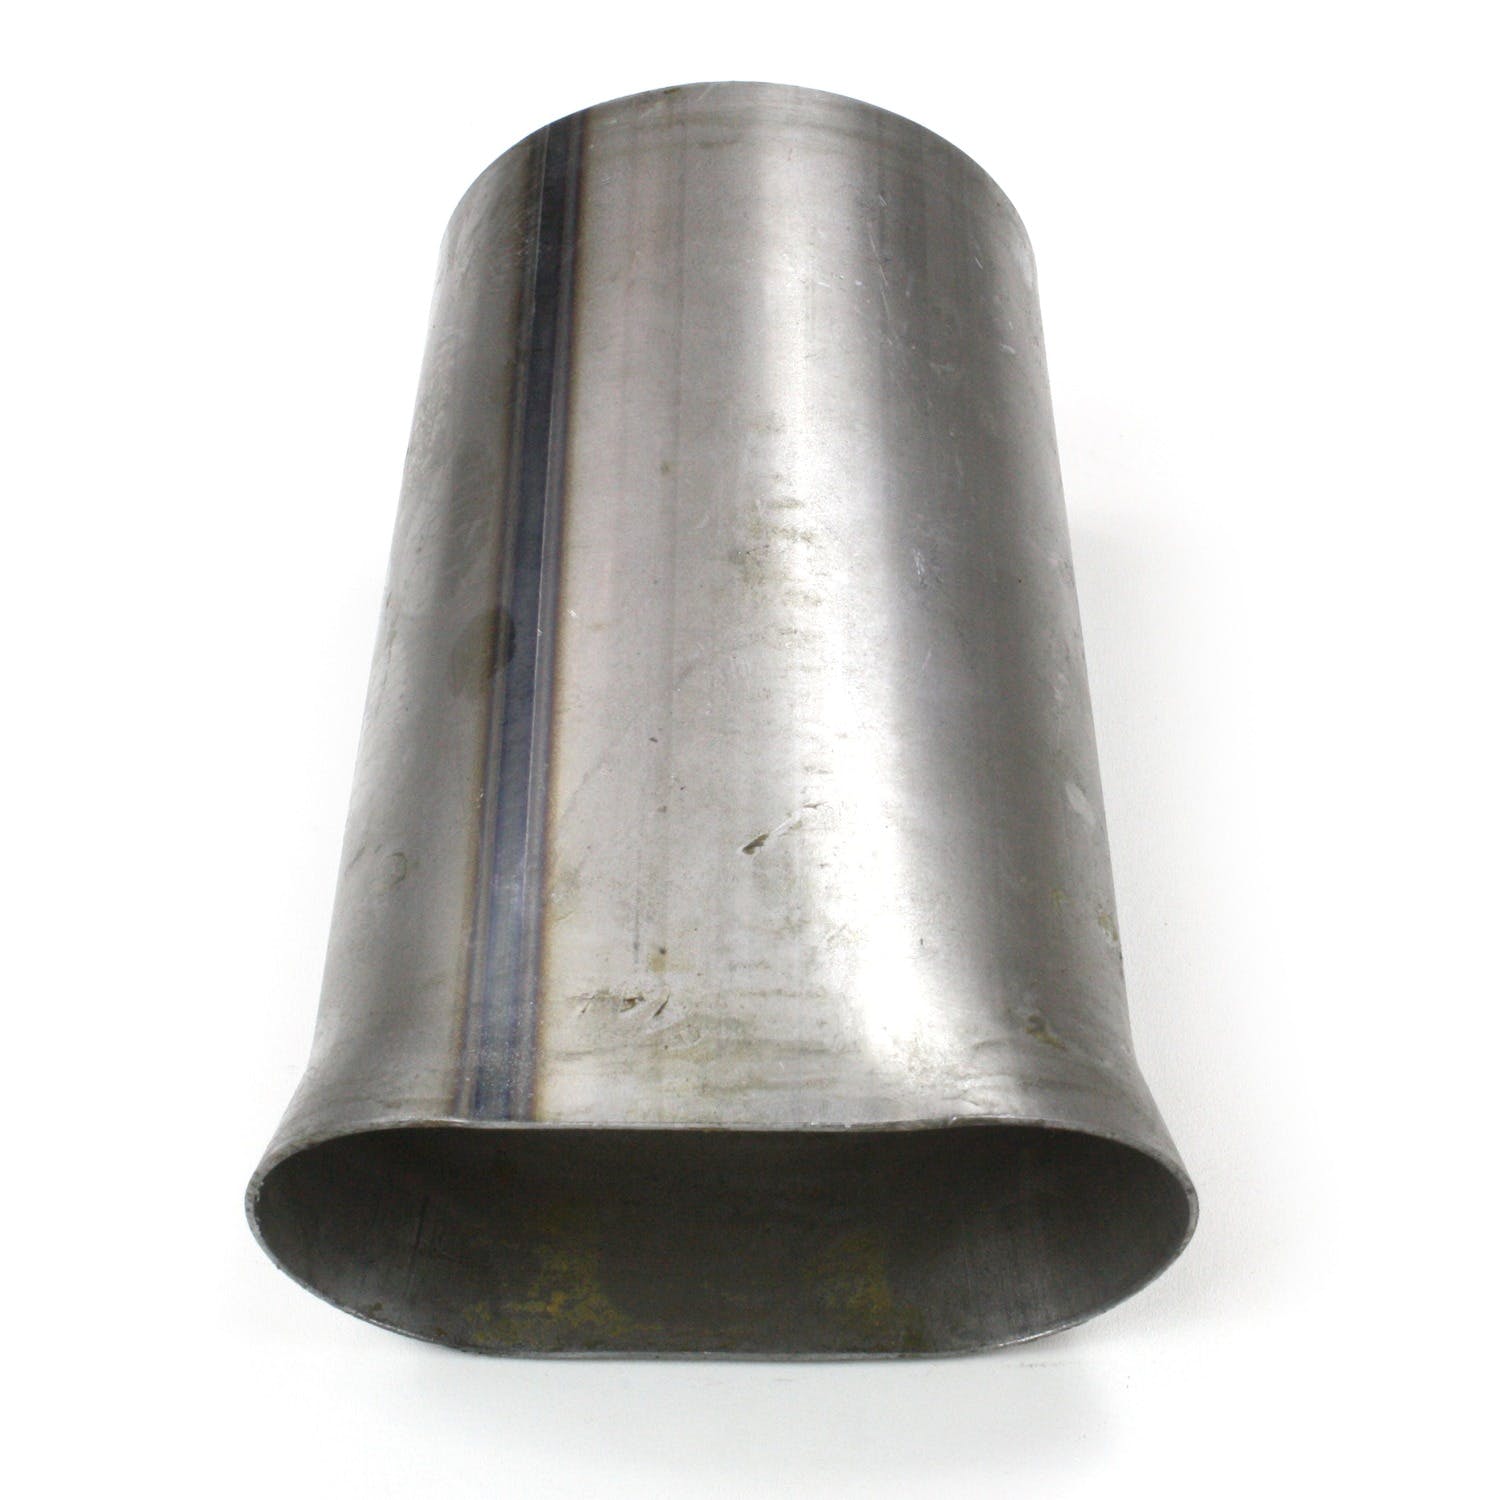 Patriot Exhaust H7666 2-1 Formed Collector 3 1/2”